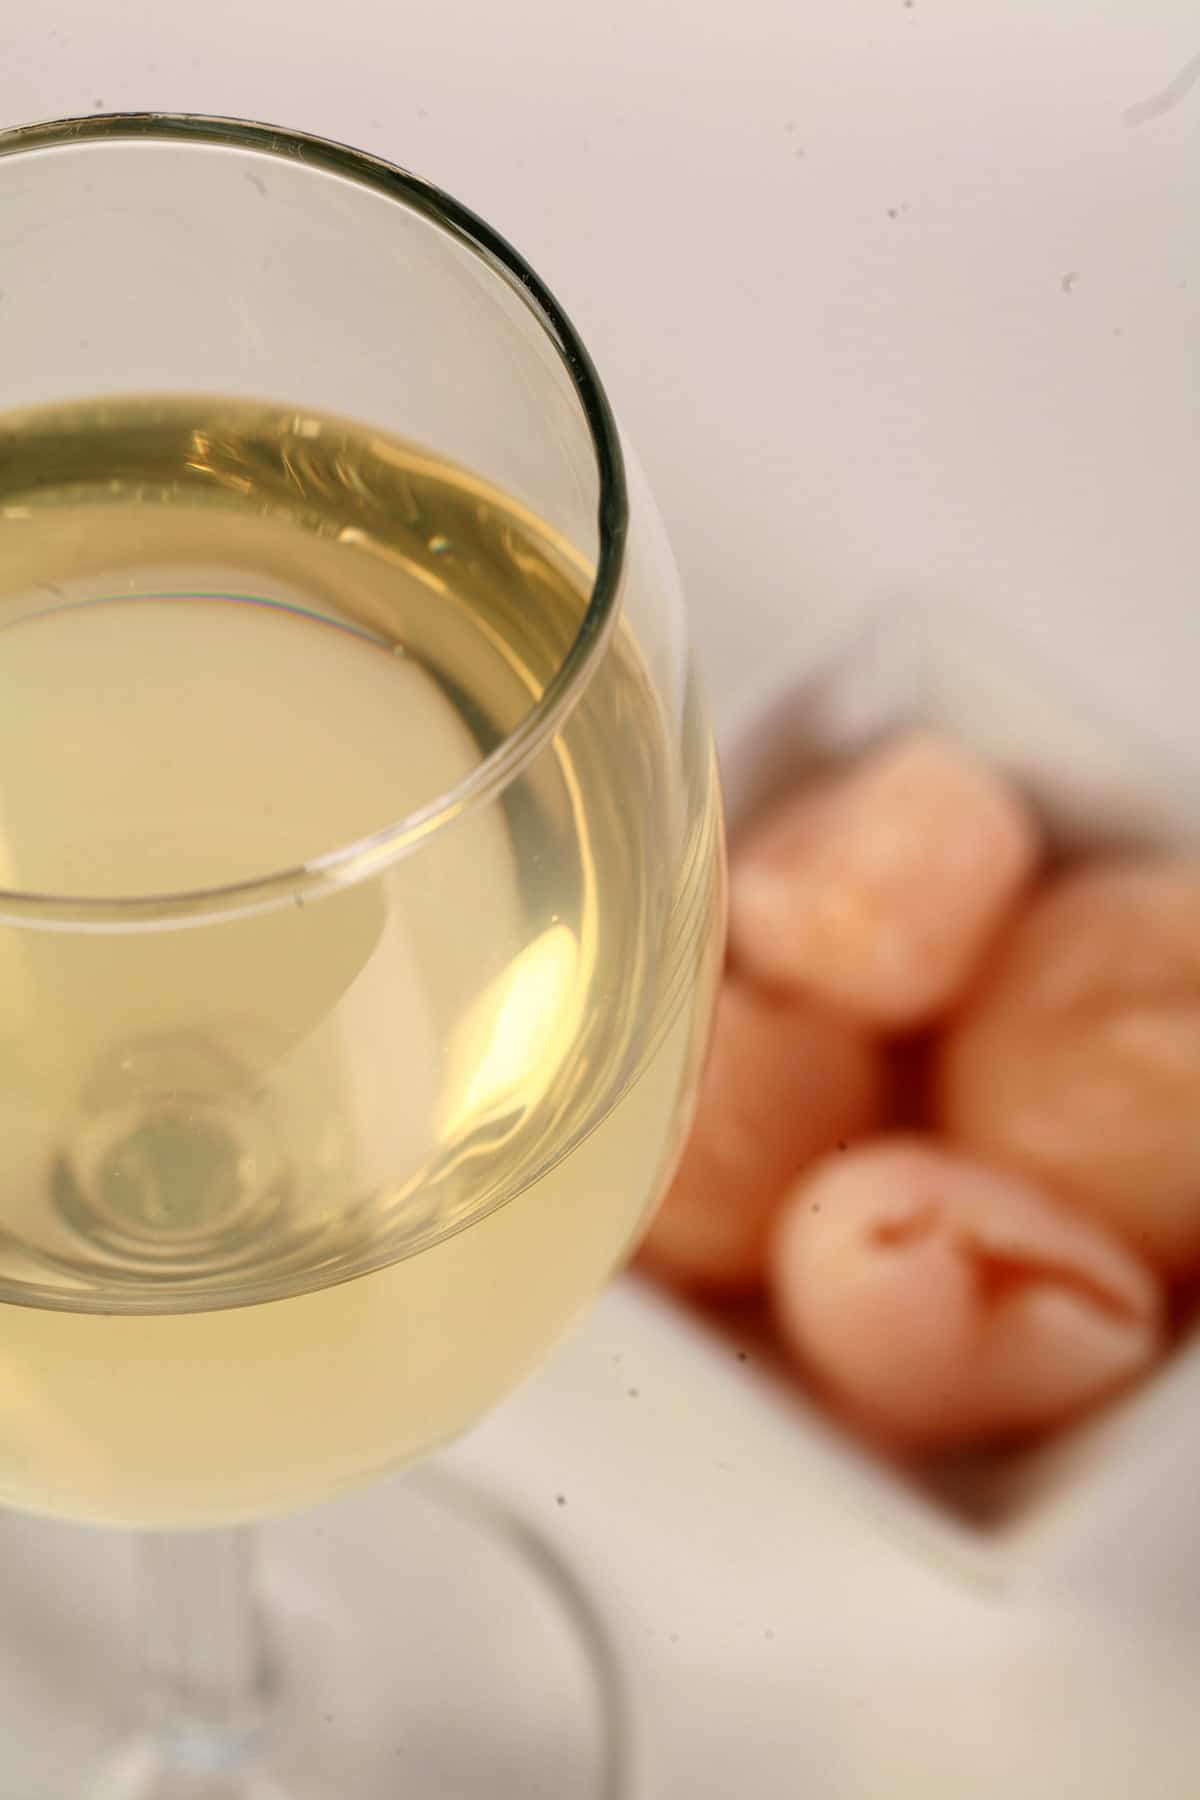 A glass of white wine  - made from this lychee wine recipe - is pictured next to a small bowl of lychee fruit.